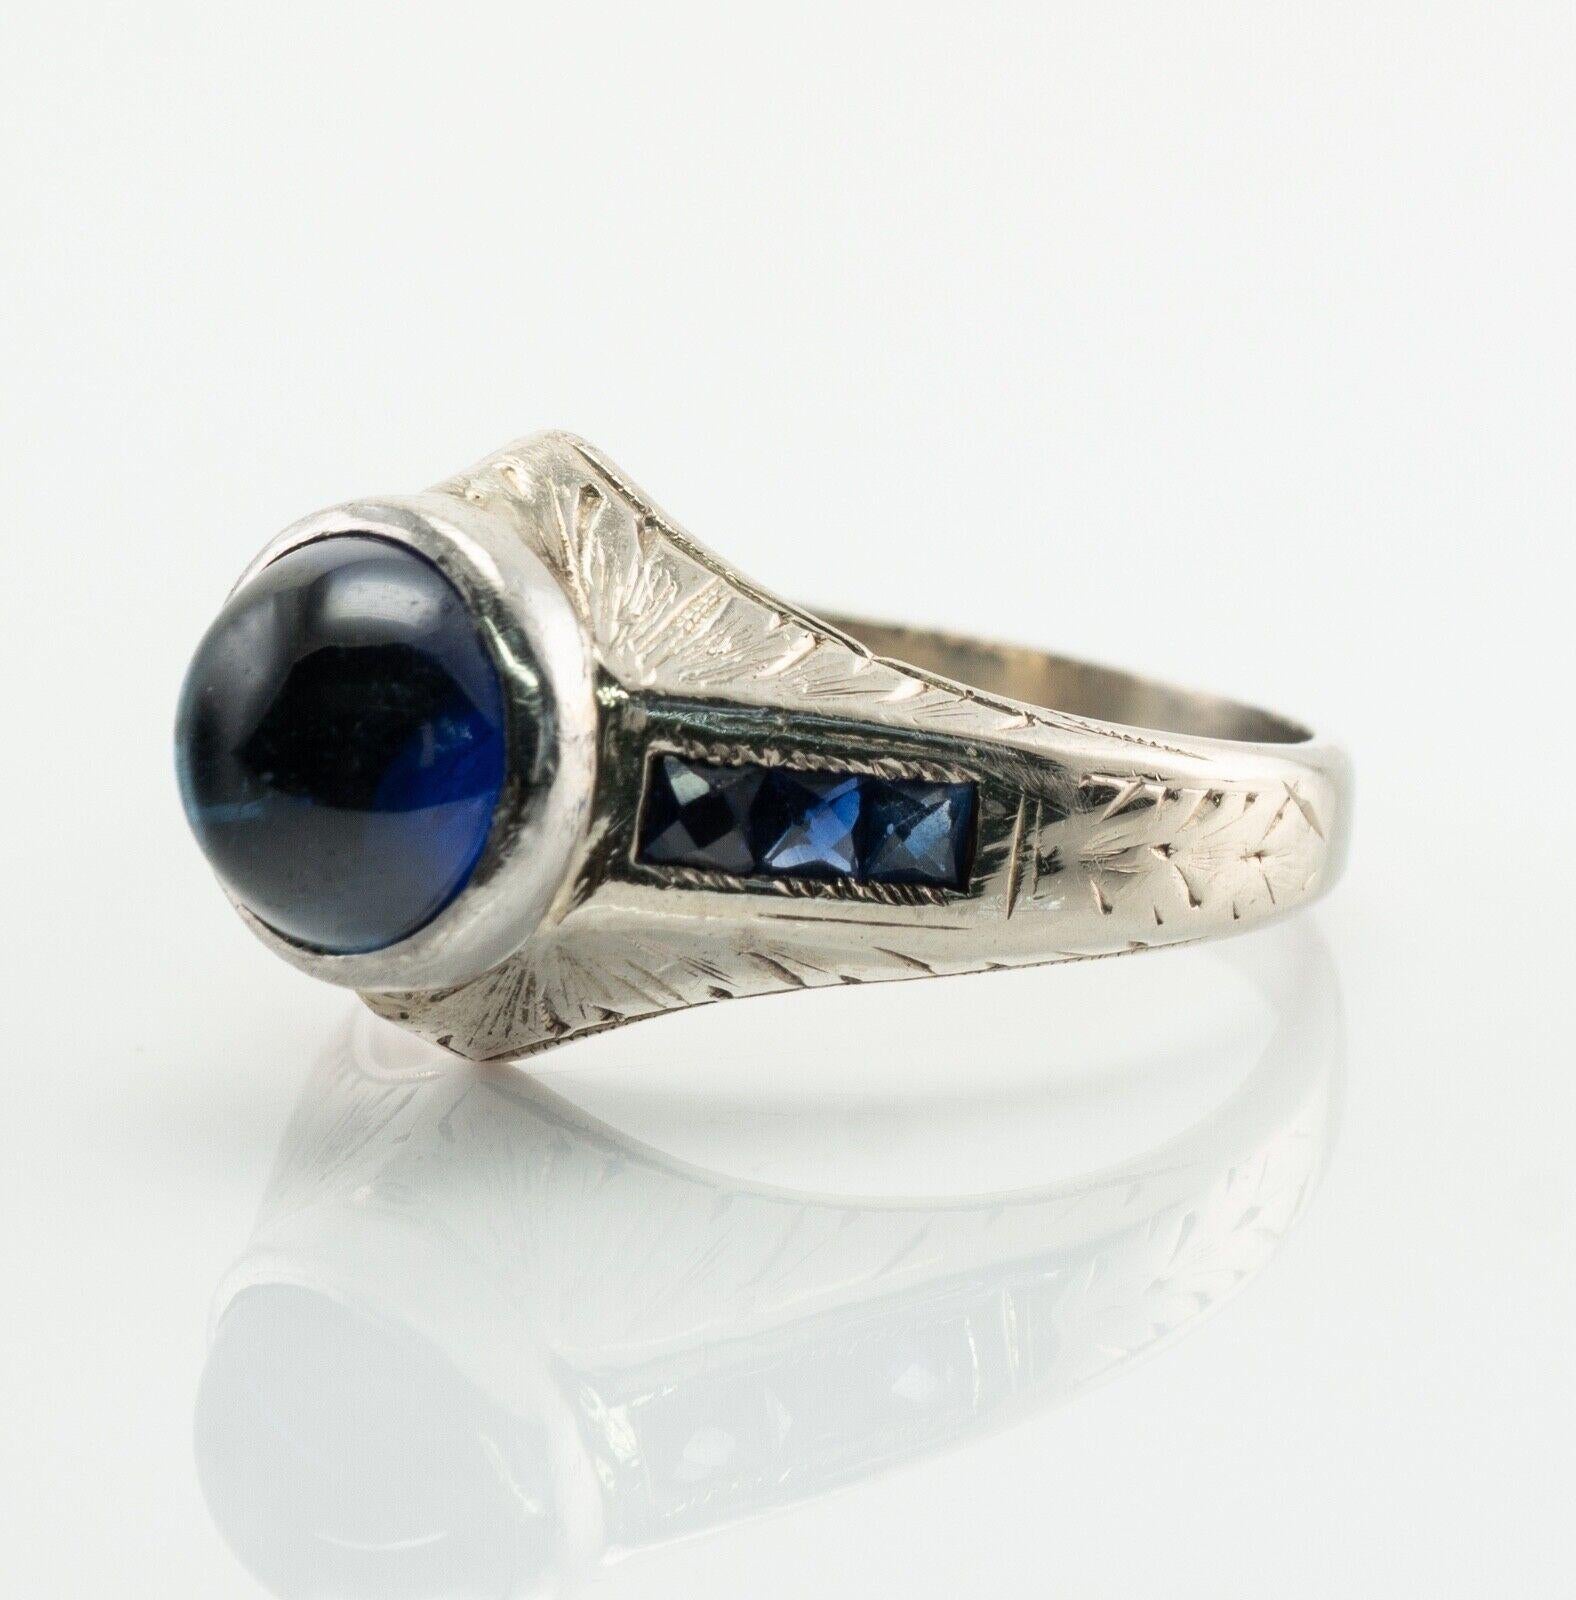 This vintage circa 1930s ring is crafted in solid 14K White gold. The center Sapphire cabochon measures 8mm. The stone looks like a good quality synthetic gem. Six french cut side sapphires are 2mm each. All gemstones are original to the setting and